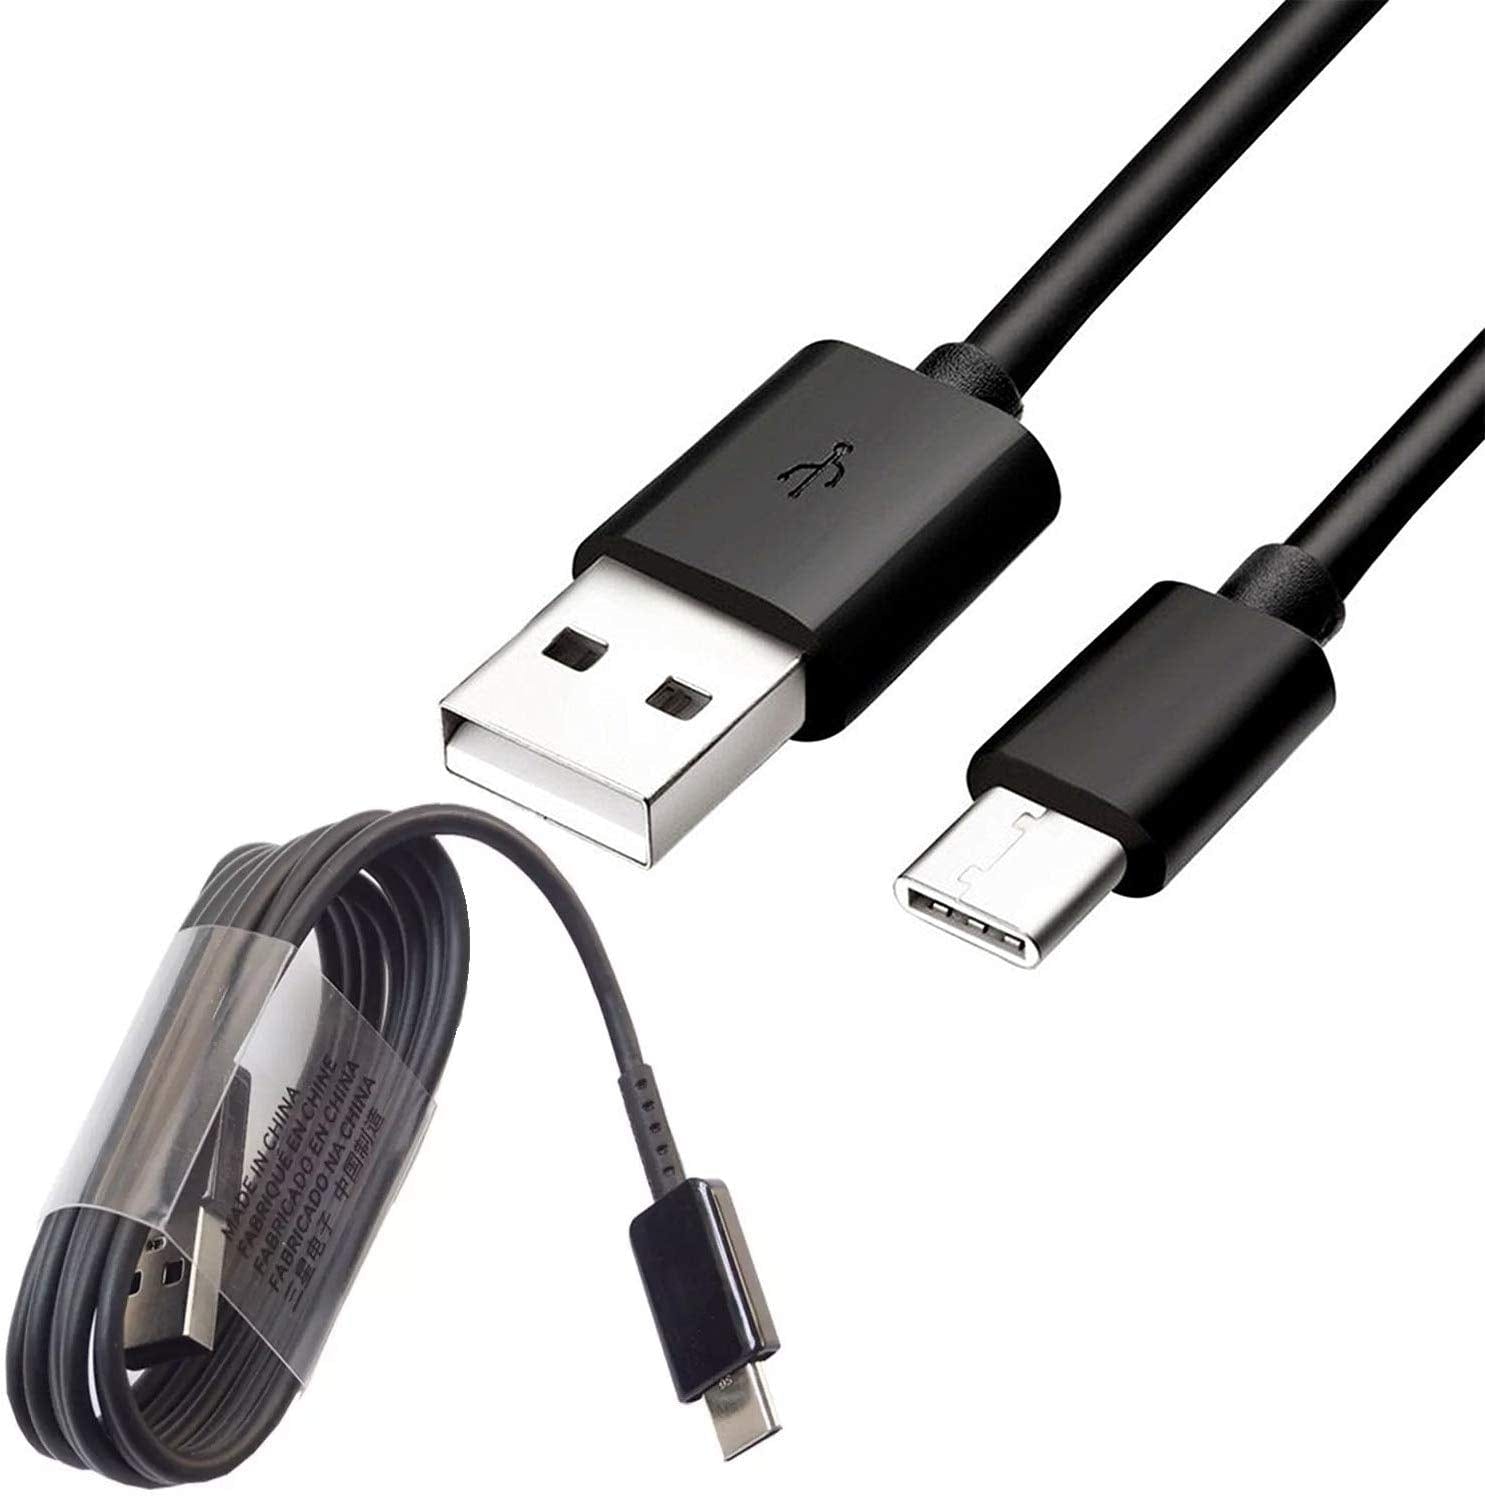 Samsung Galaxy A70 USB Cable Type C Charging Cable Lead Black - 3M - SmartPhoneGadgetUK